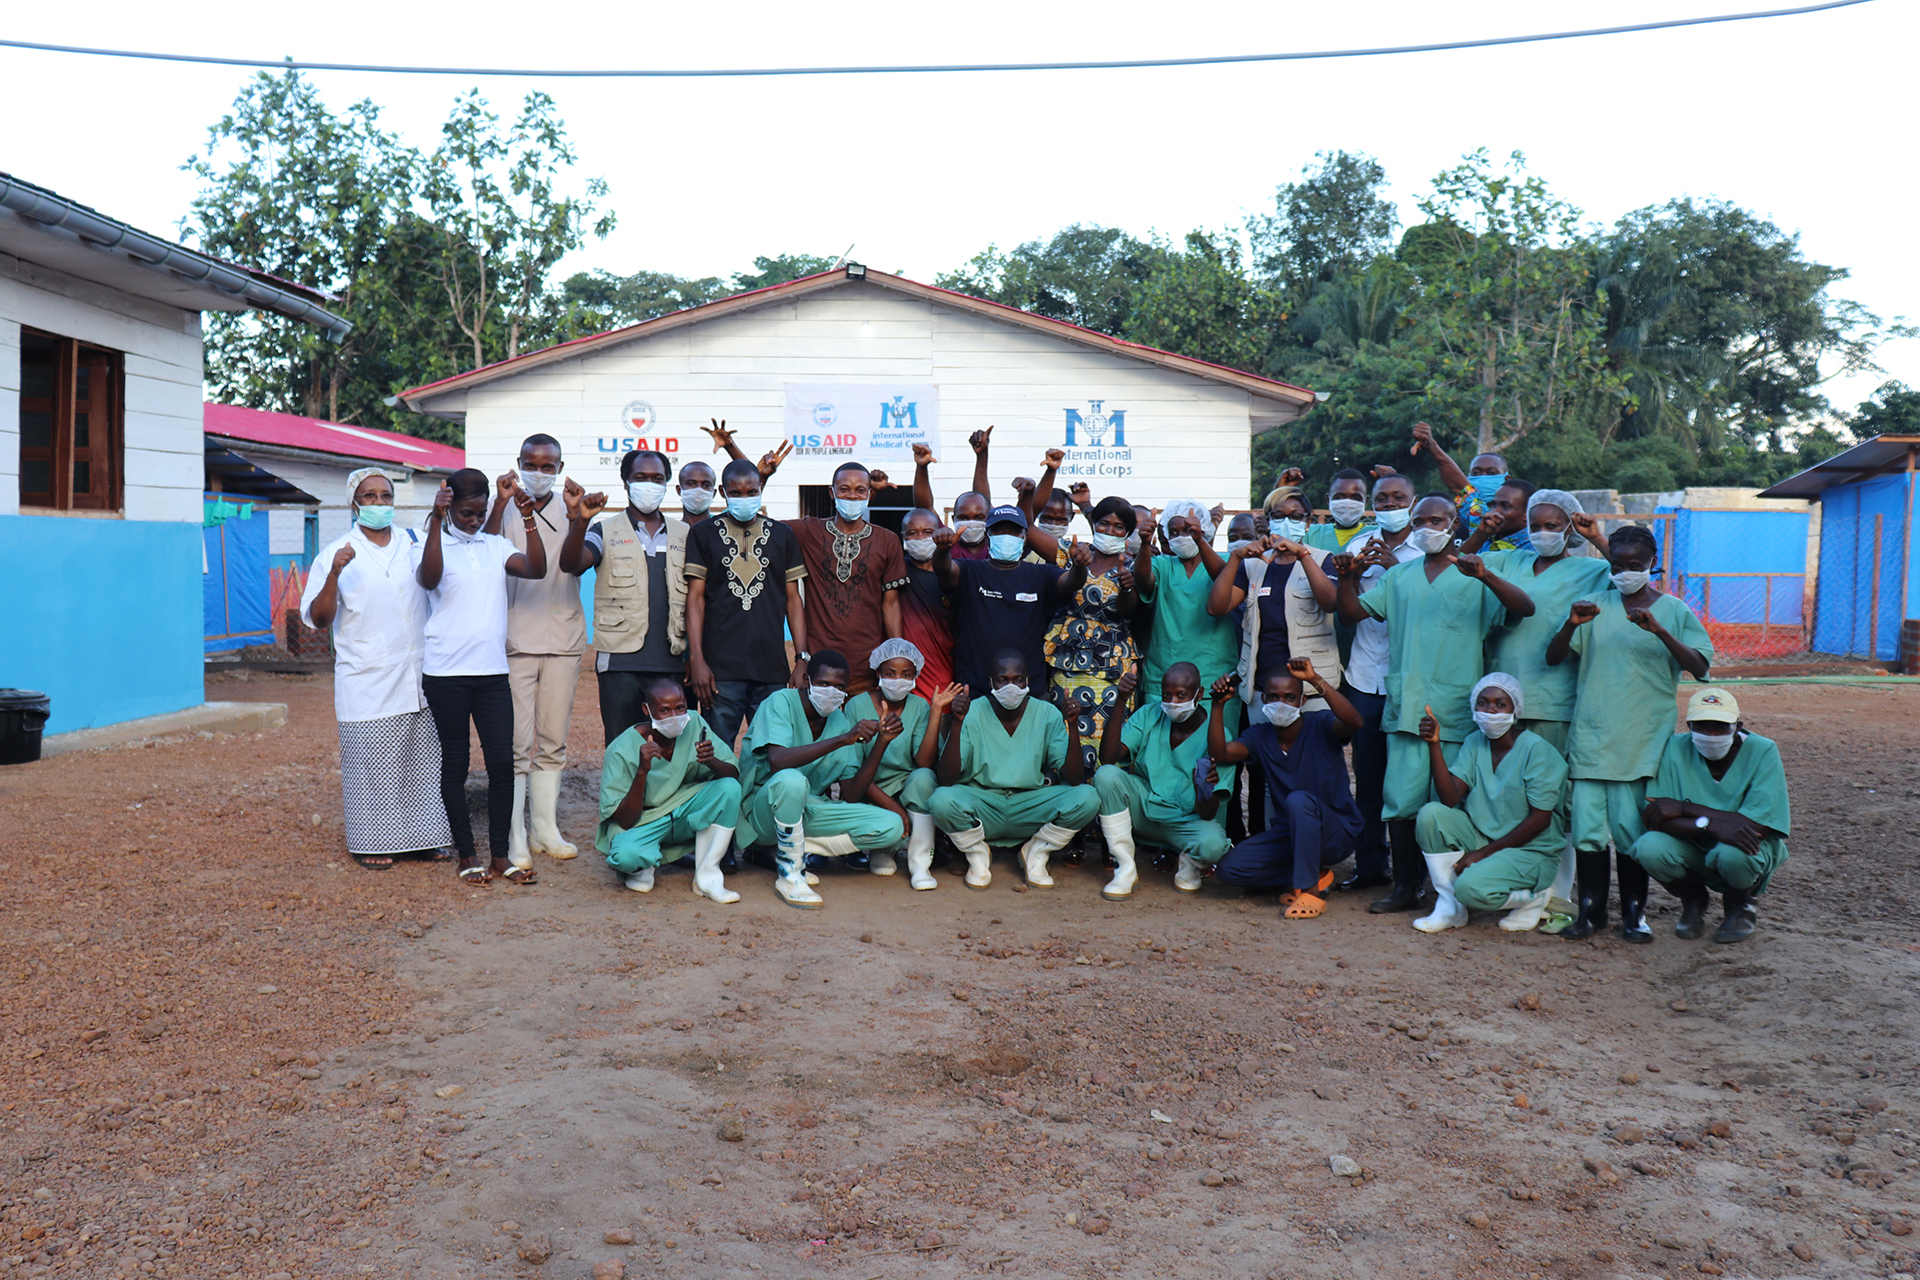 Inauguration of a new building of the Bikoro Ebola Treatment Center, Equator, DRC.